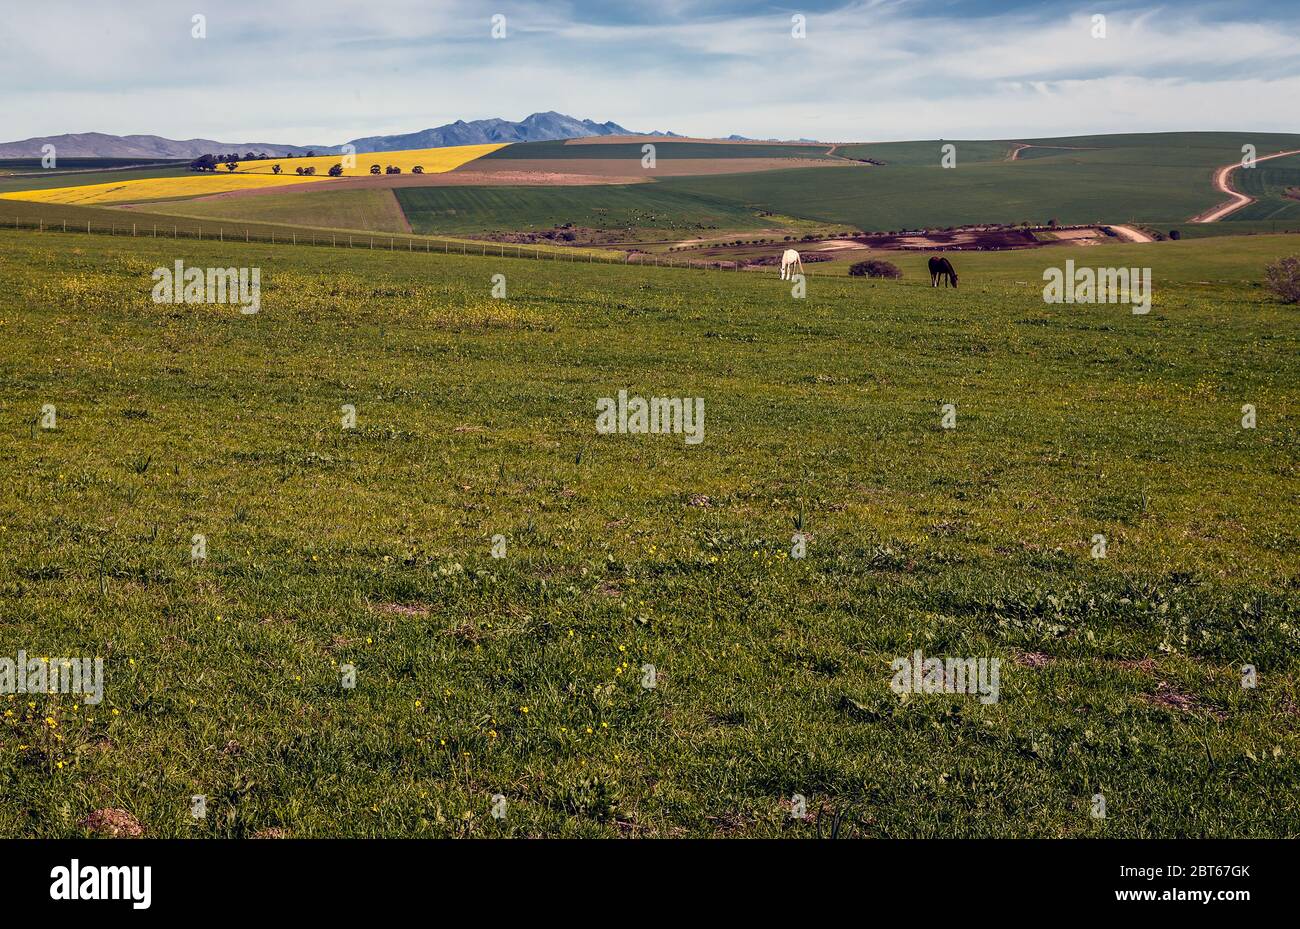 A rural sceene of canola and wheat fields with low clouds with grazing horses against mountains, Western Cape Province, South Africa Stock Photo